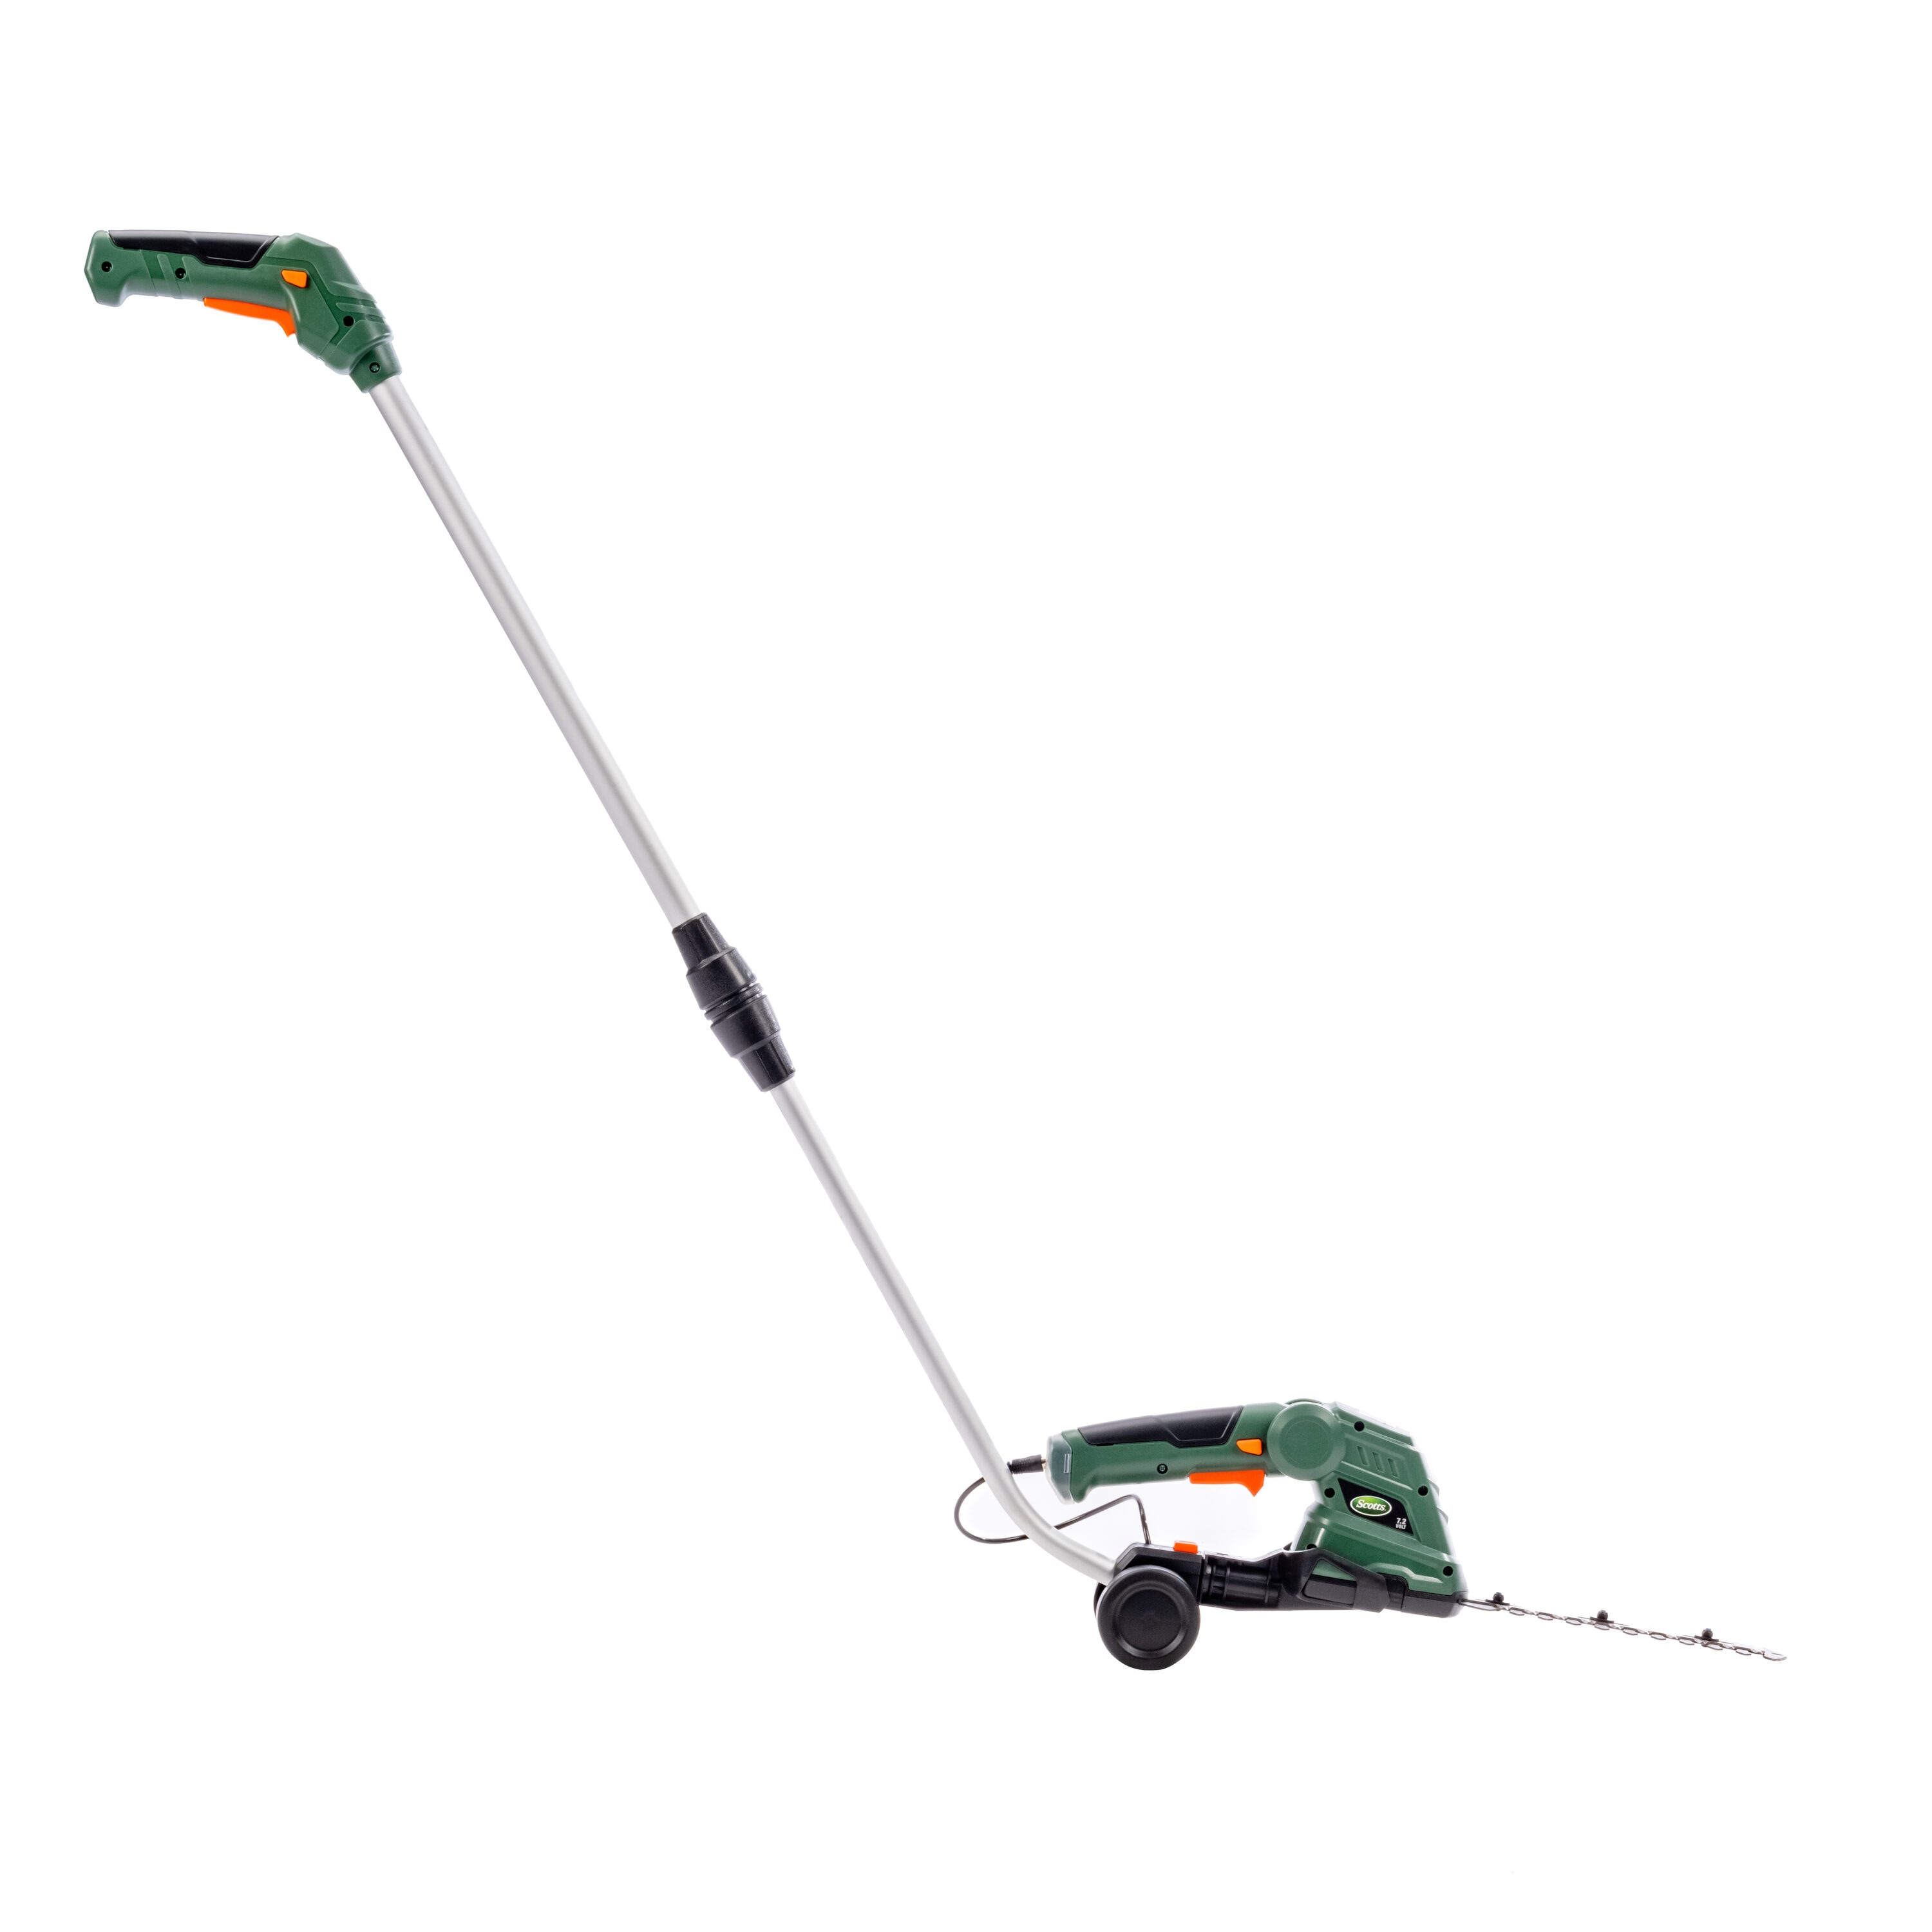 Scotts 20 3.2-Amp 120V Corded Hedge Trimmer – American Lawn Mower